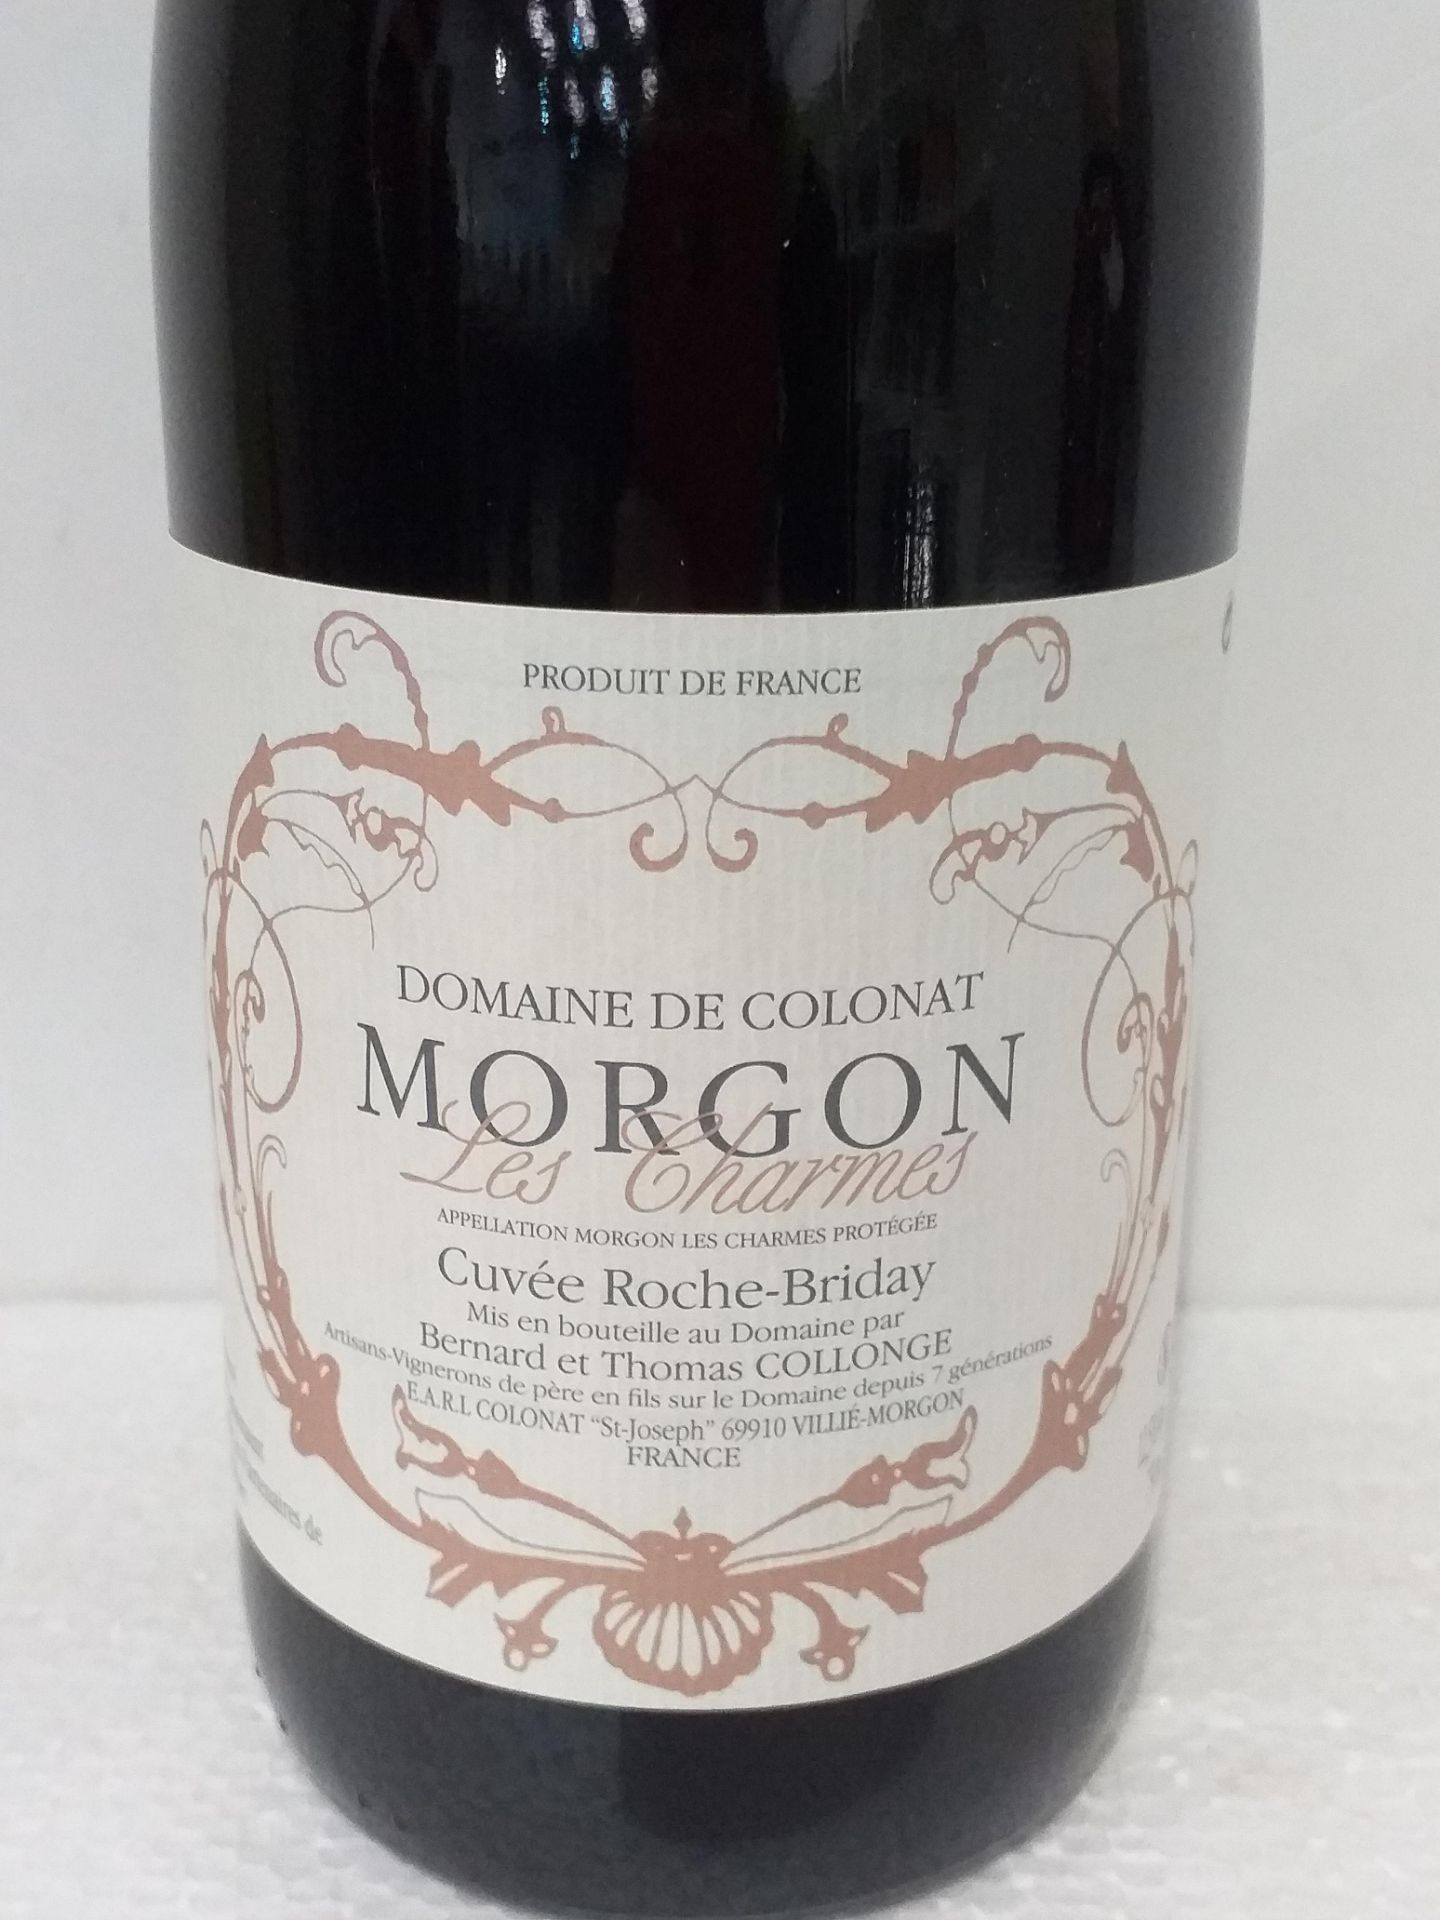 12 Bottles of Morgan Roche Briday rouge 2017 - Image 2 of 3